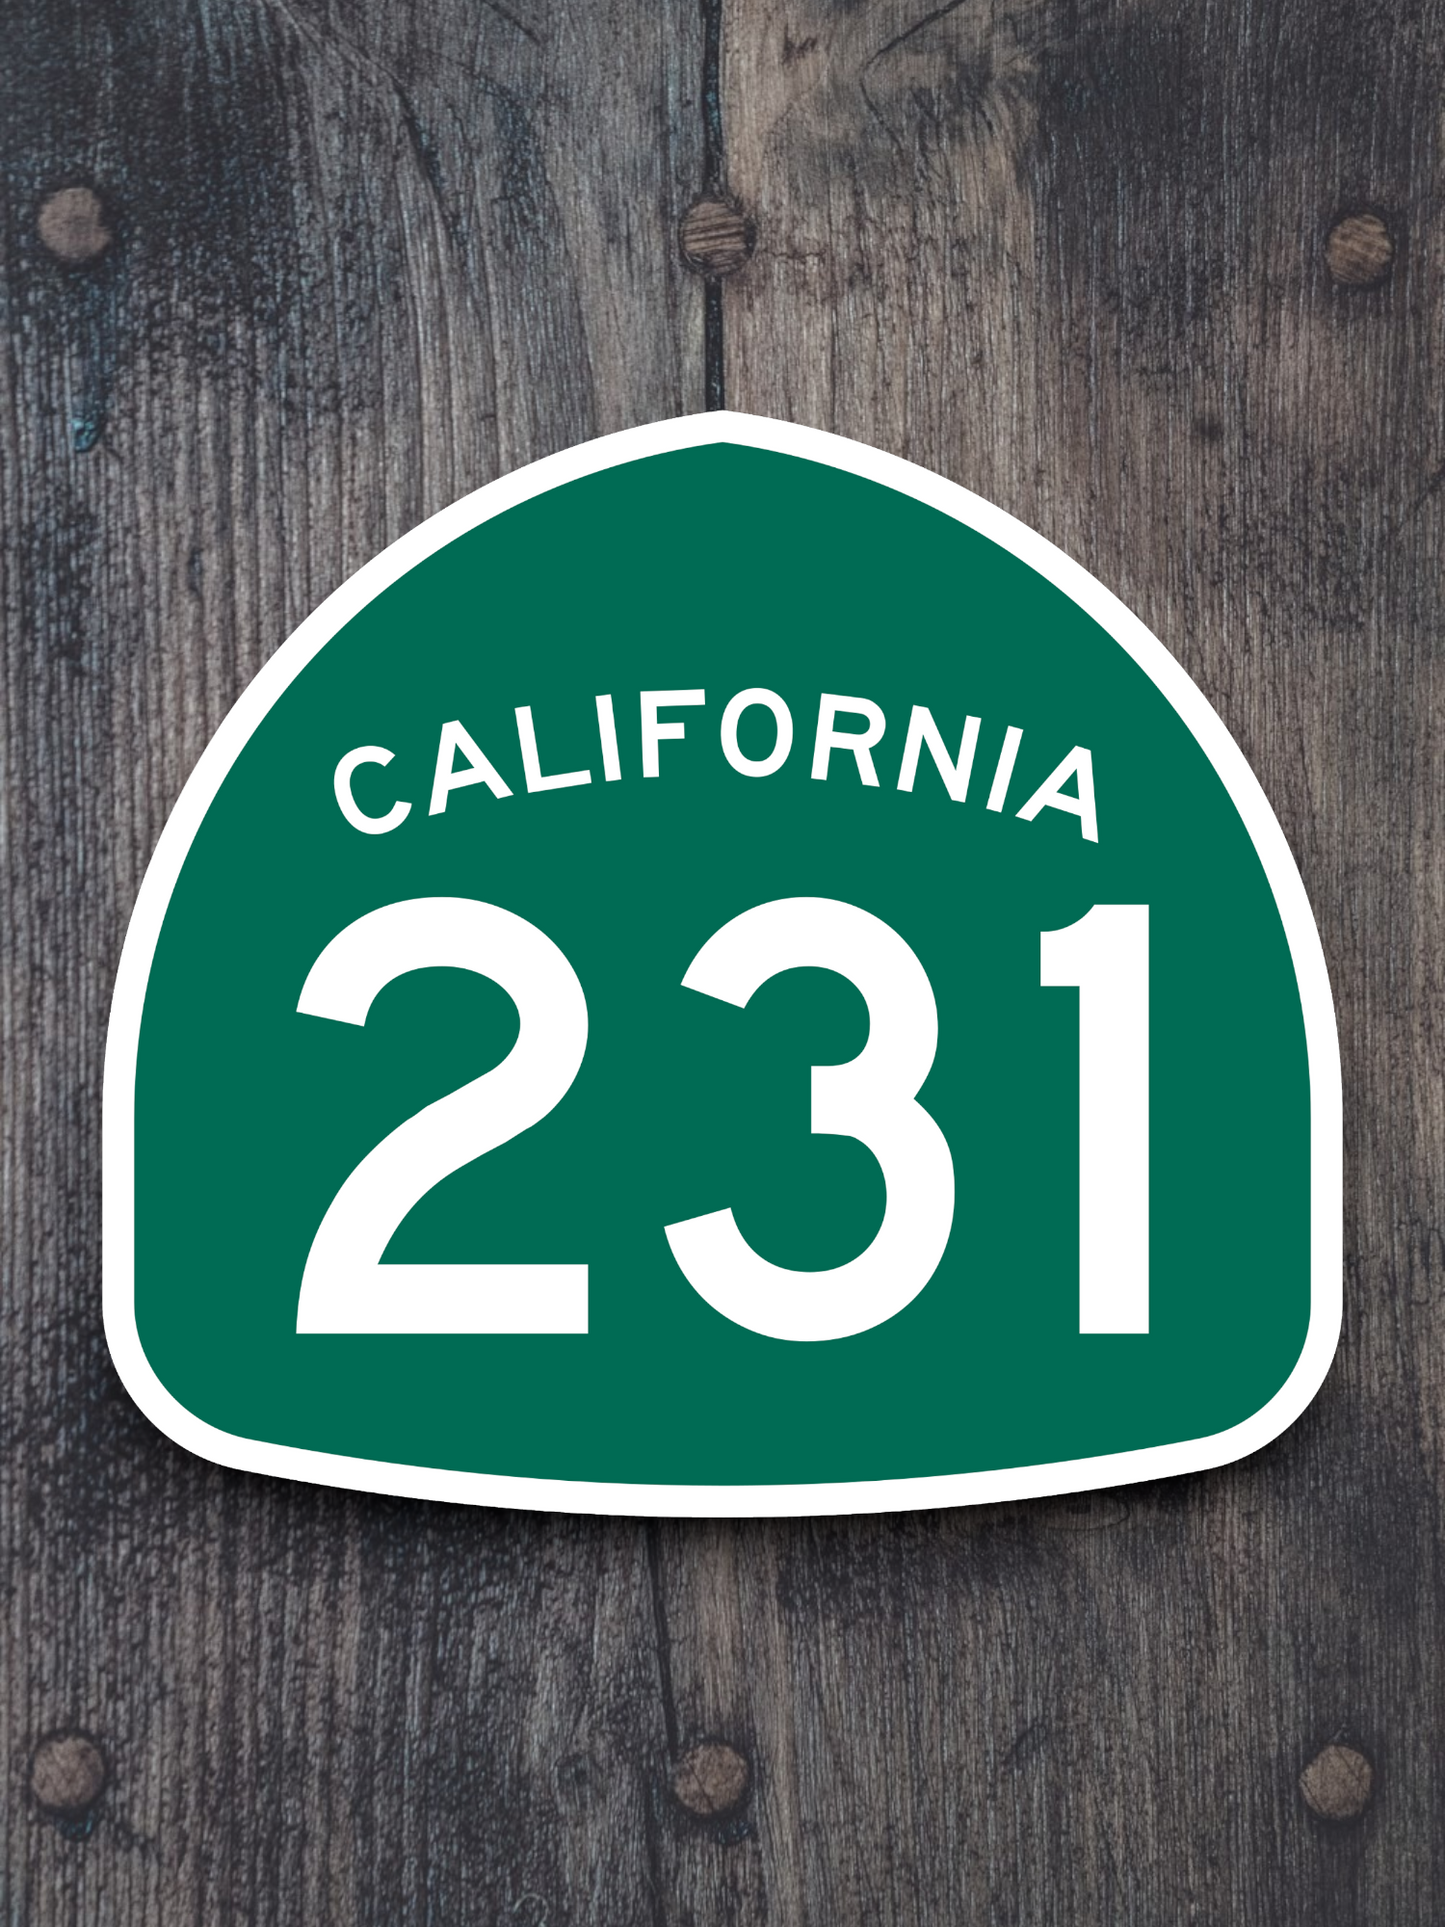 California State Route 231 Road Sign Sticker